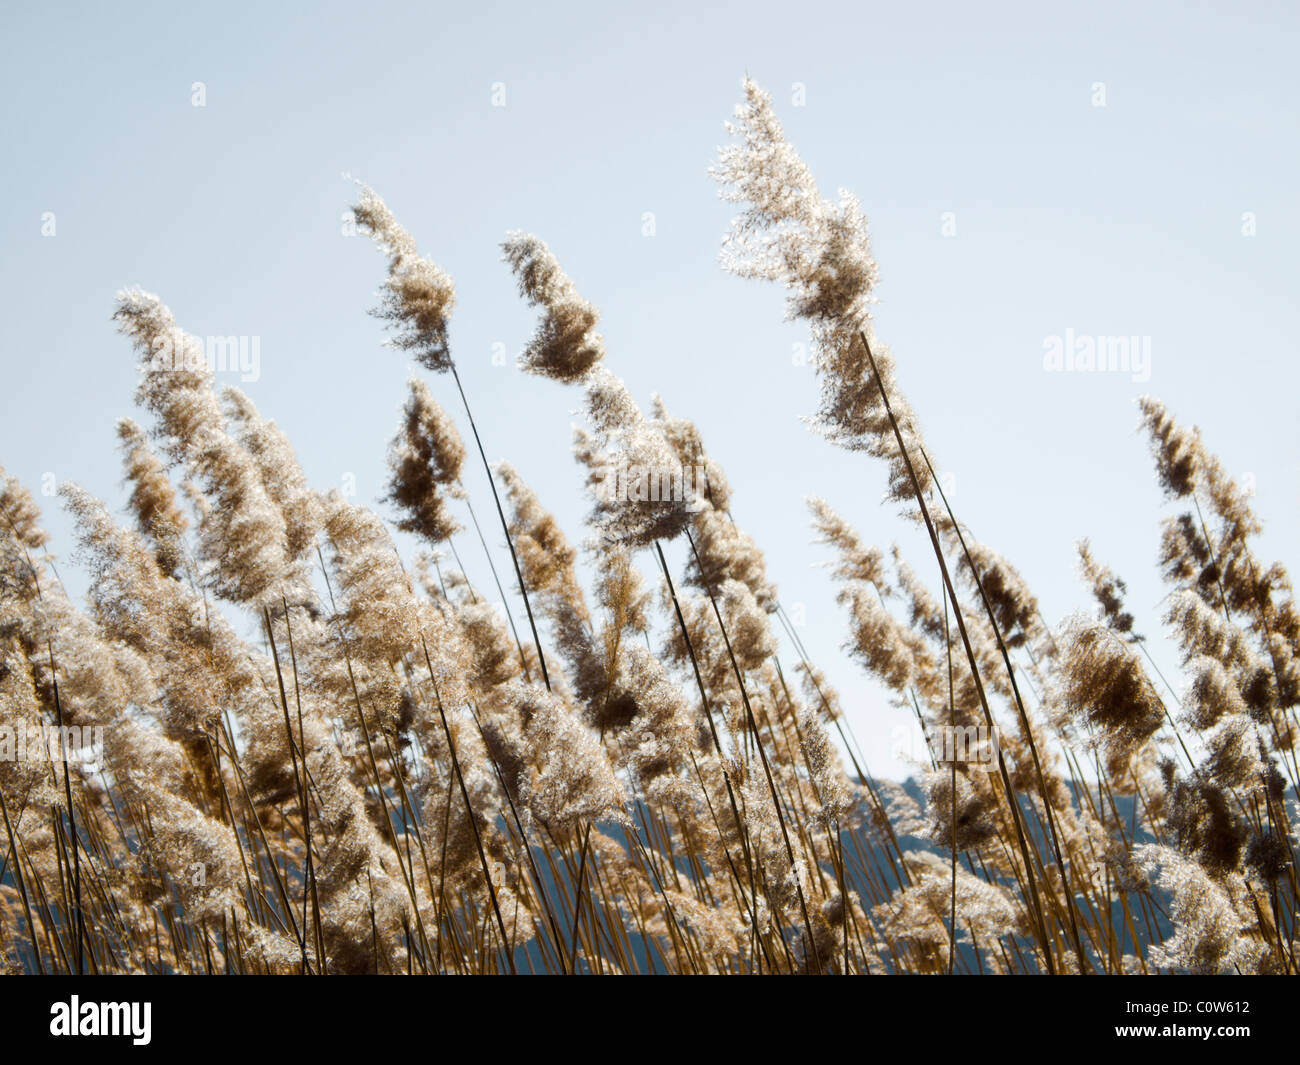 common reed (phragmites australis) in the wind, against clear sky, winter season Stock Photo